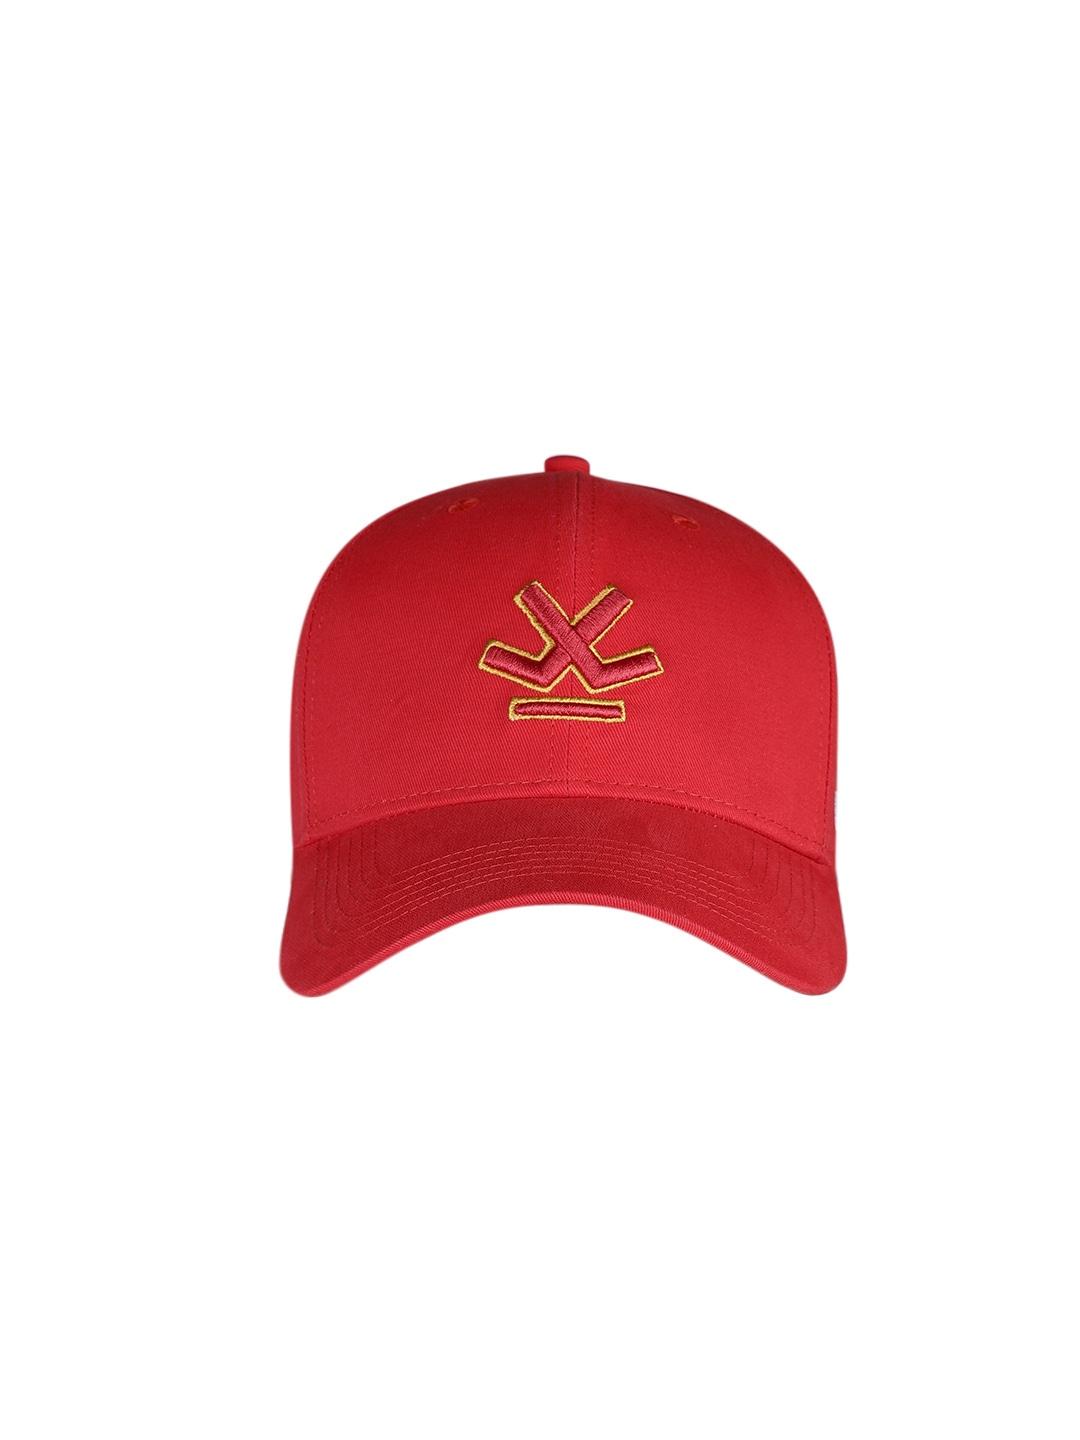 wrogn unisex red embroidered baseball cap